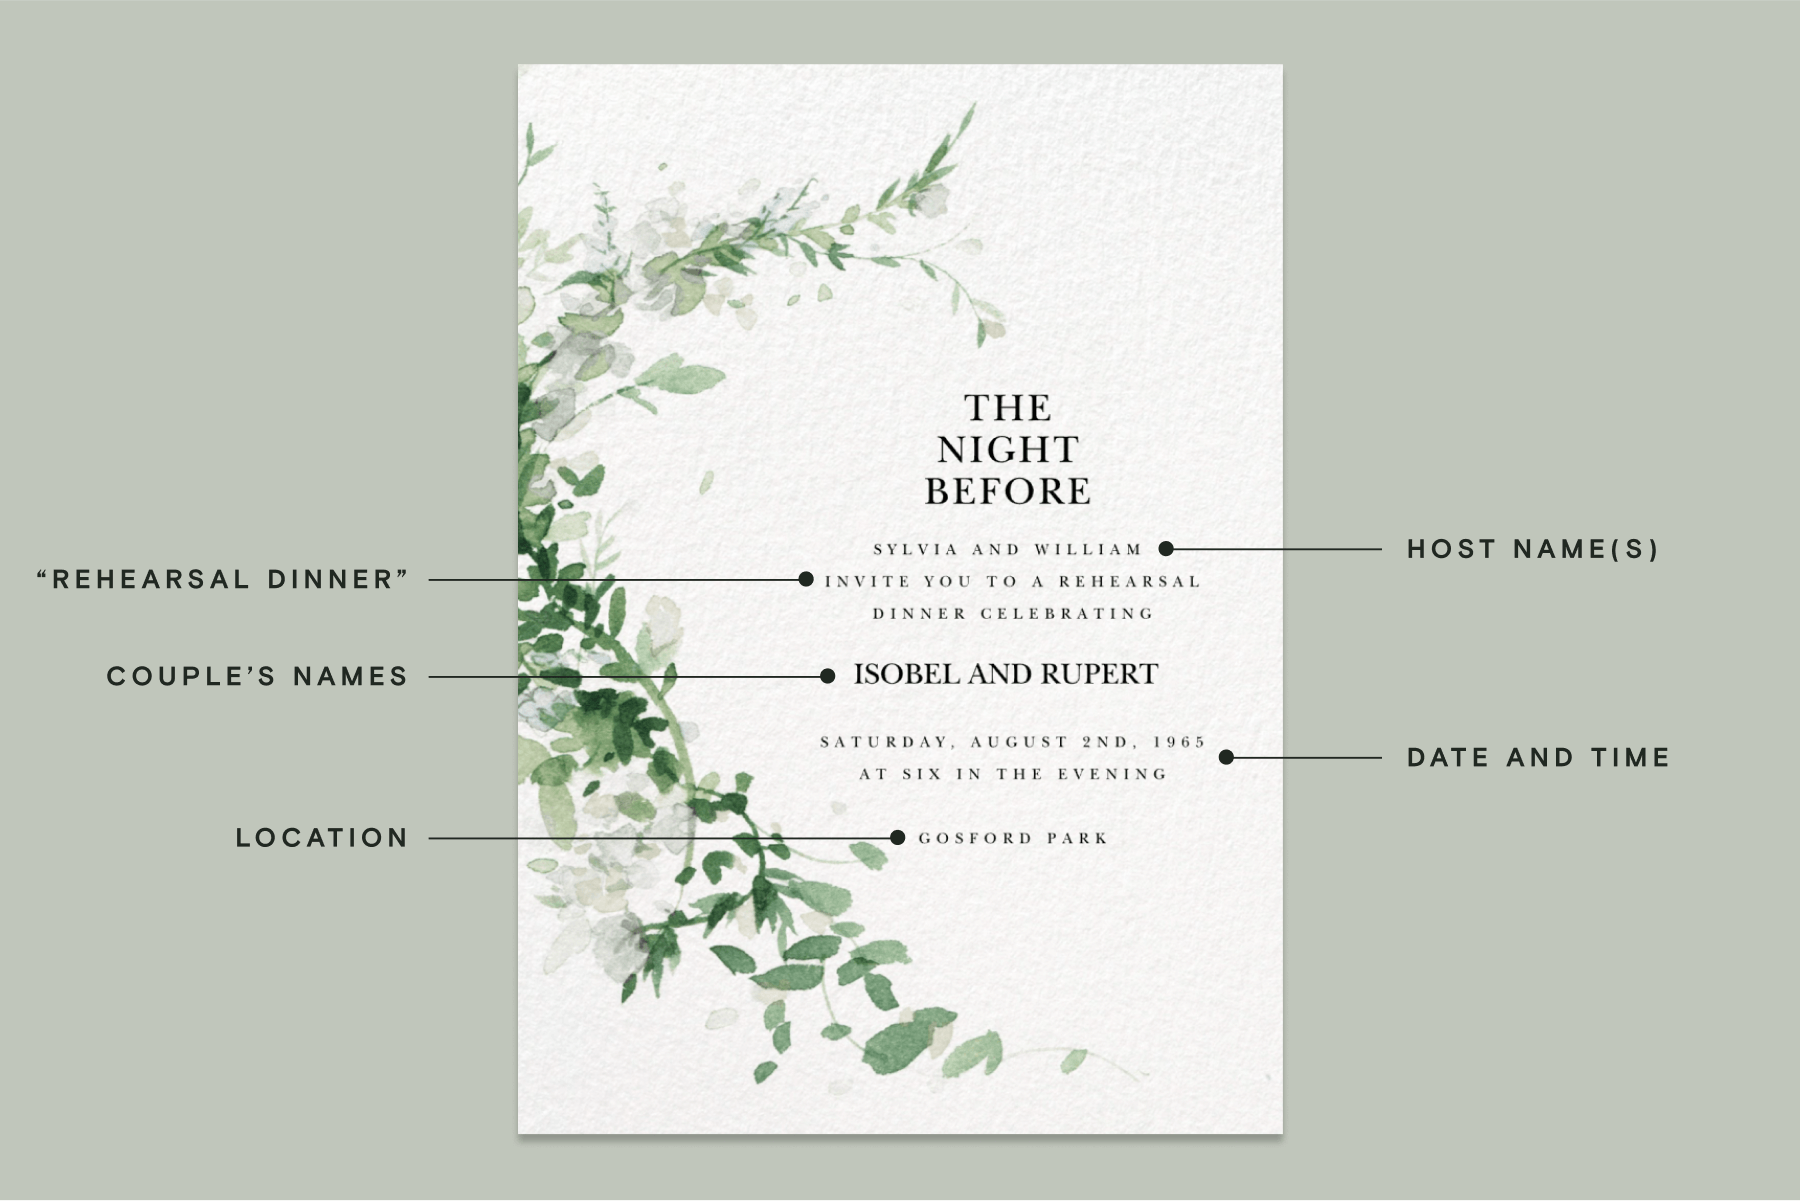 A green watercolor rehearsal dinner invitation with a diagram showing where to write important information like host name(s), the couple’s names, the date and time, and the location.